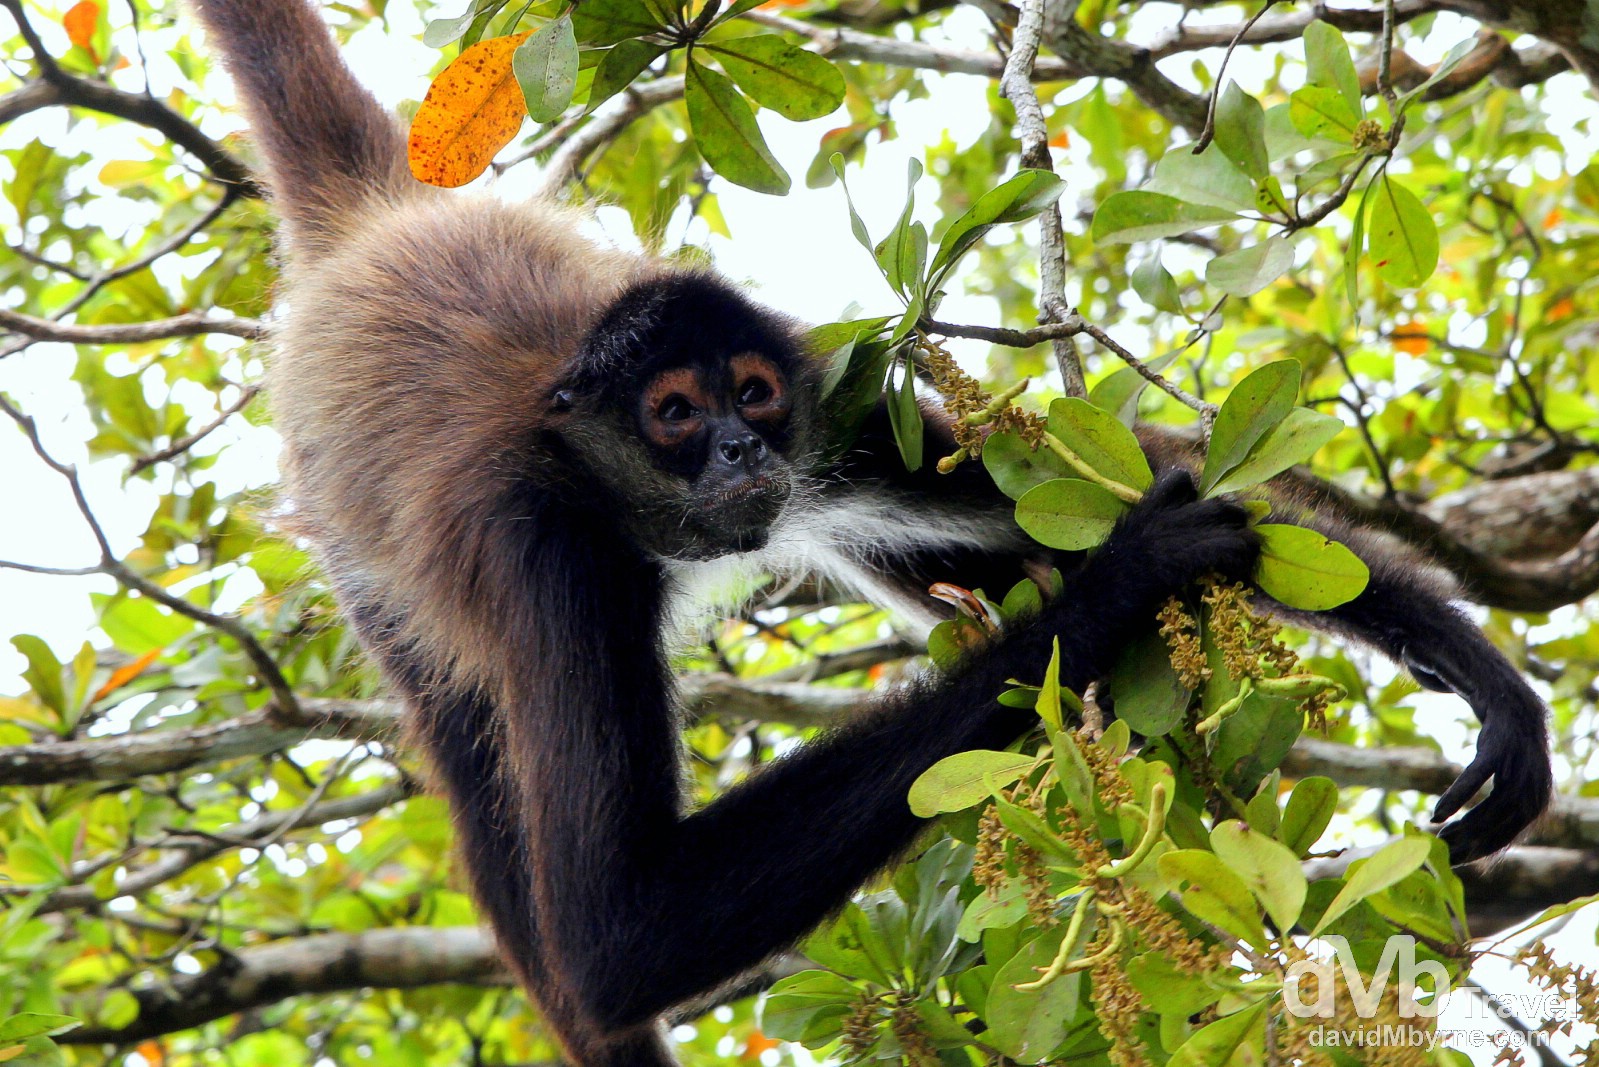 A monkey hangs from overhanging vegetation on the New River, Central Belize. May 11th 2013.